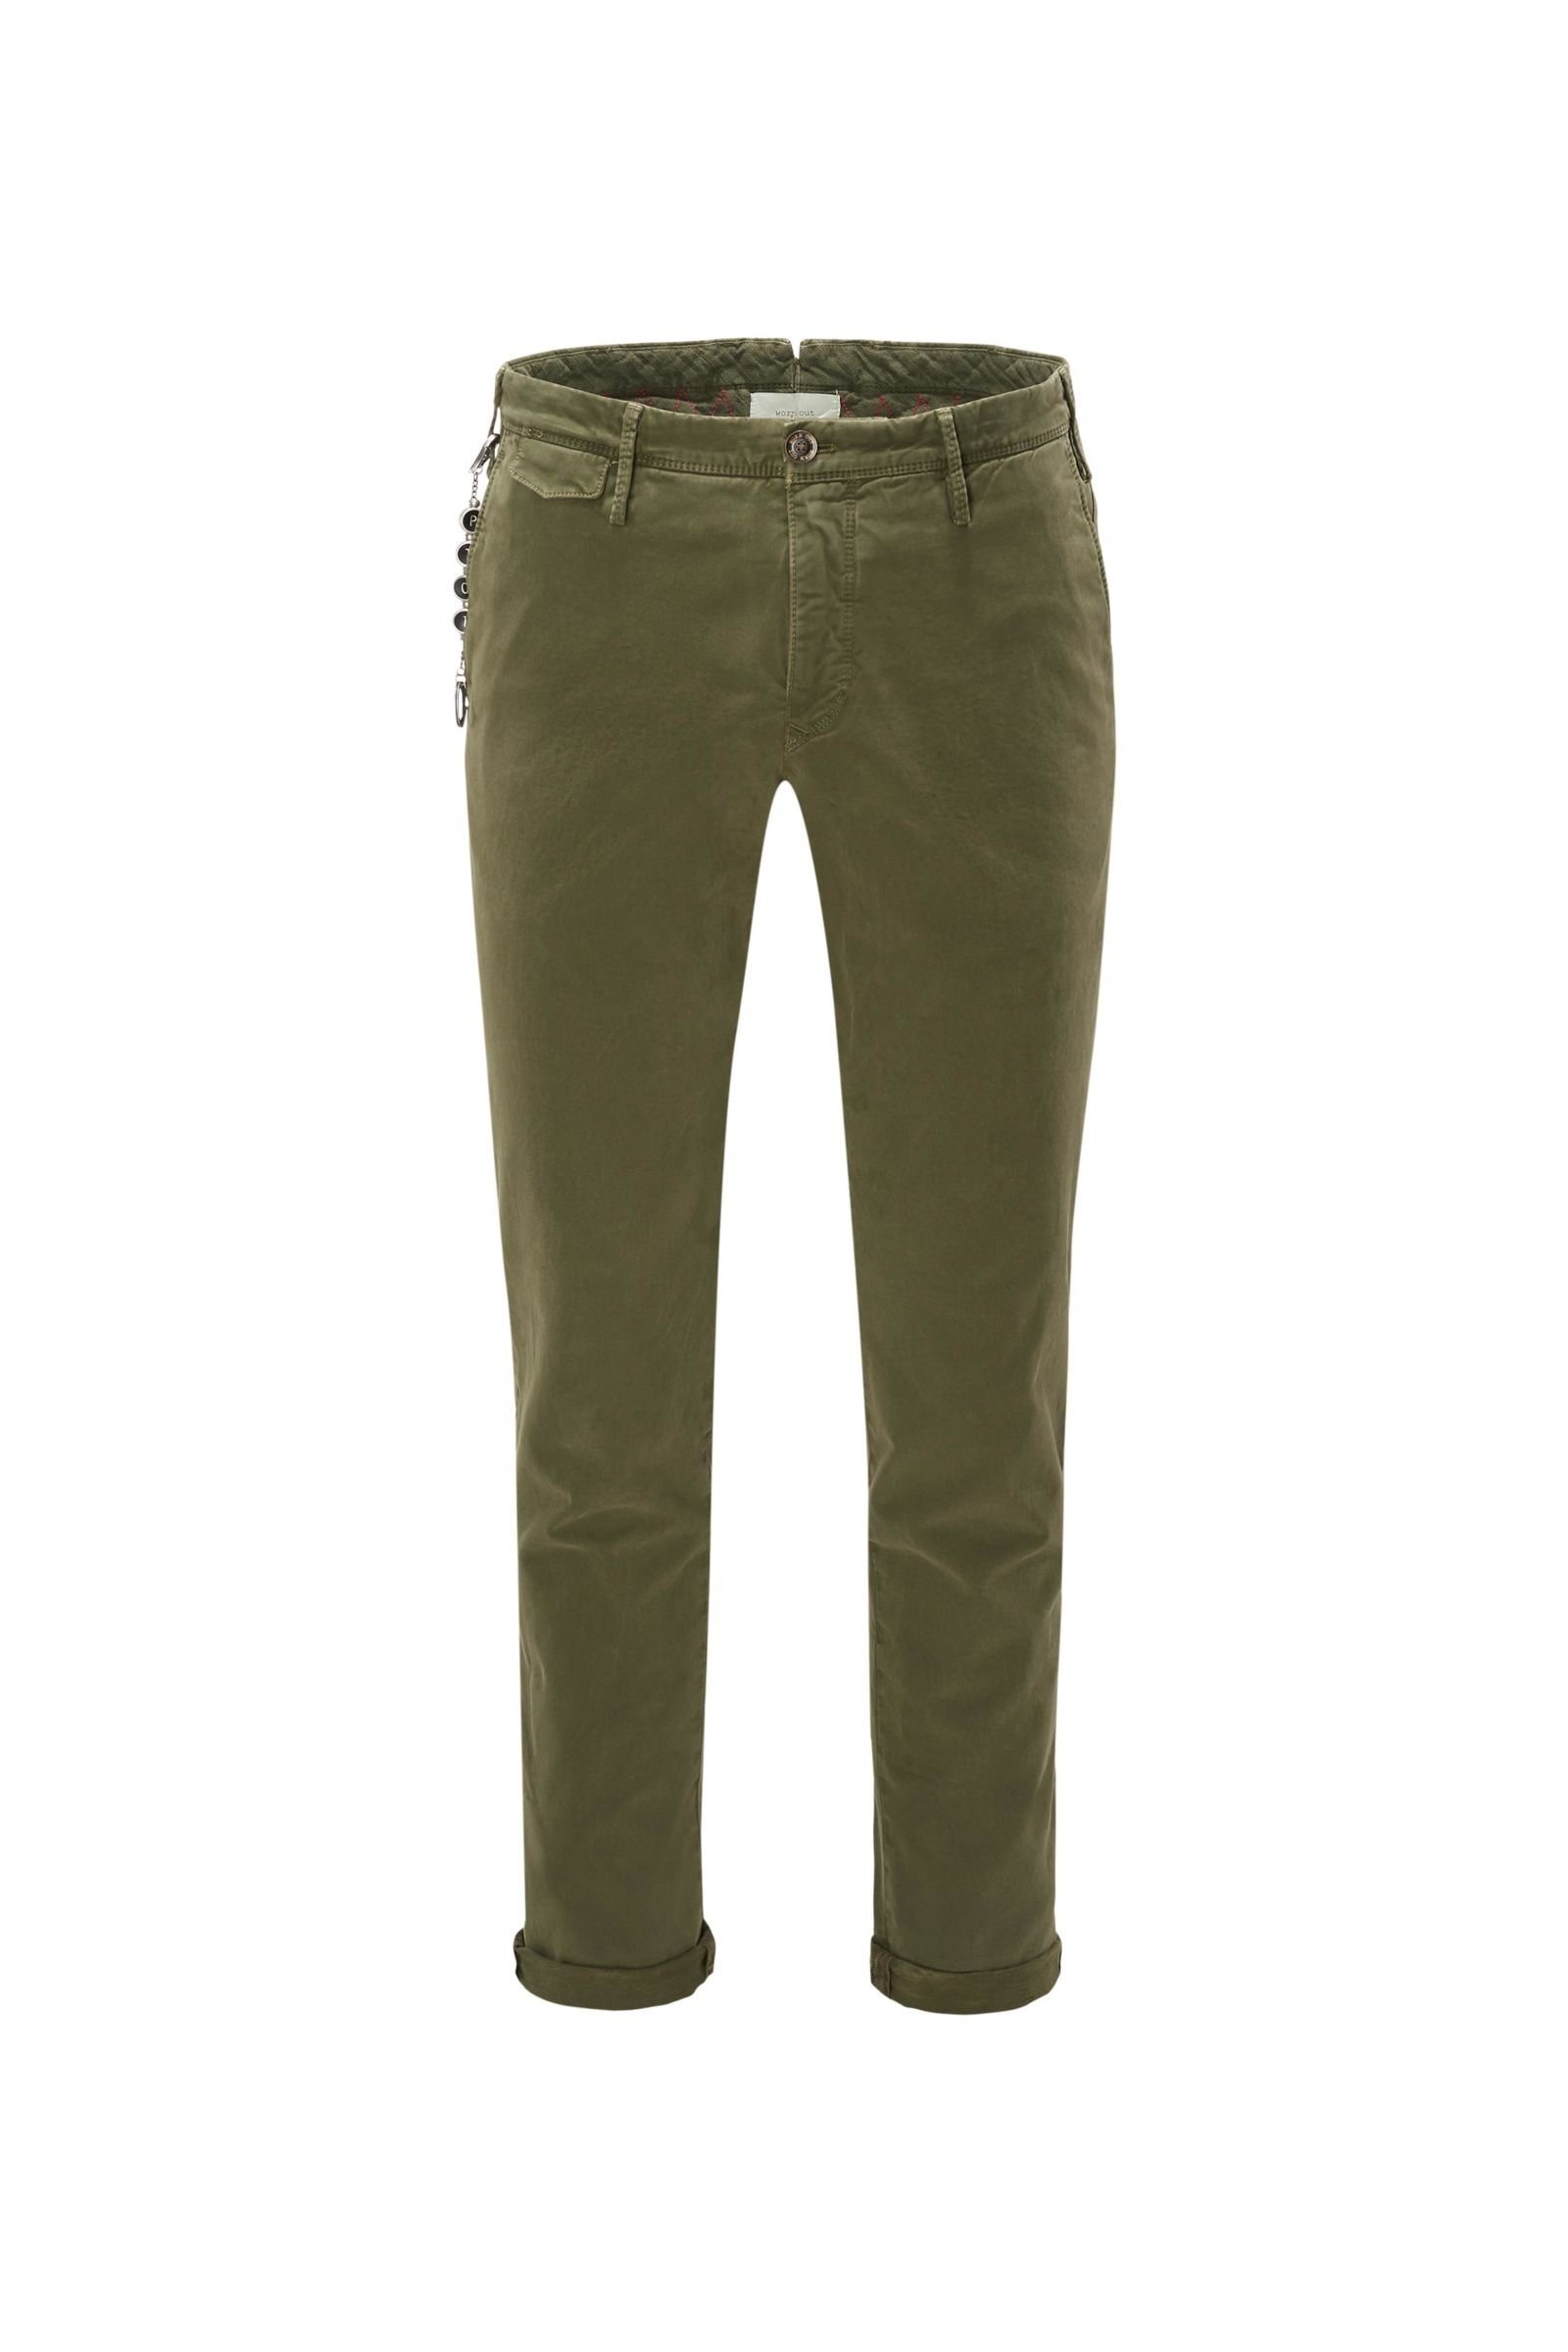 Cotton trousers 'Worn out Elegance' olive